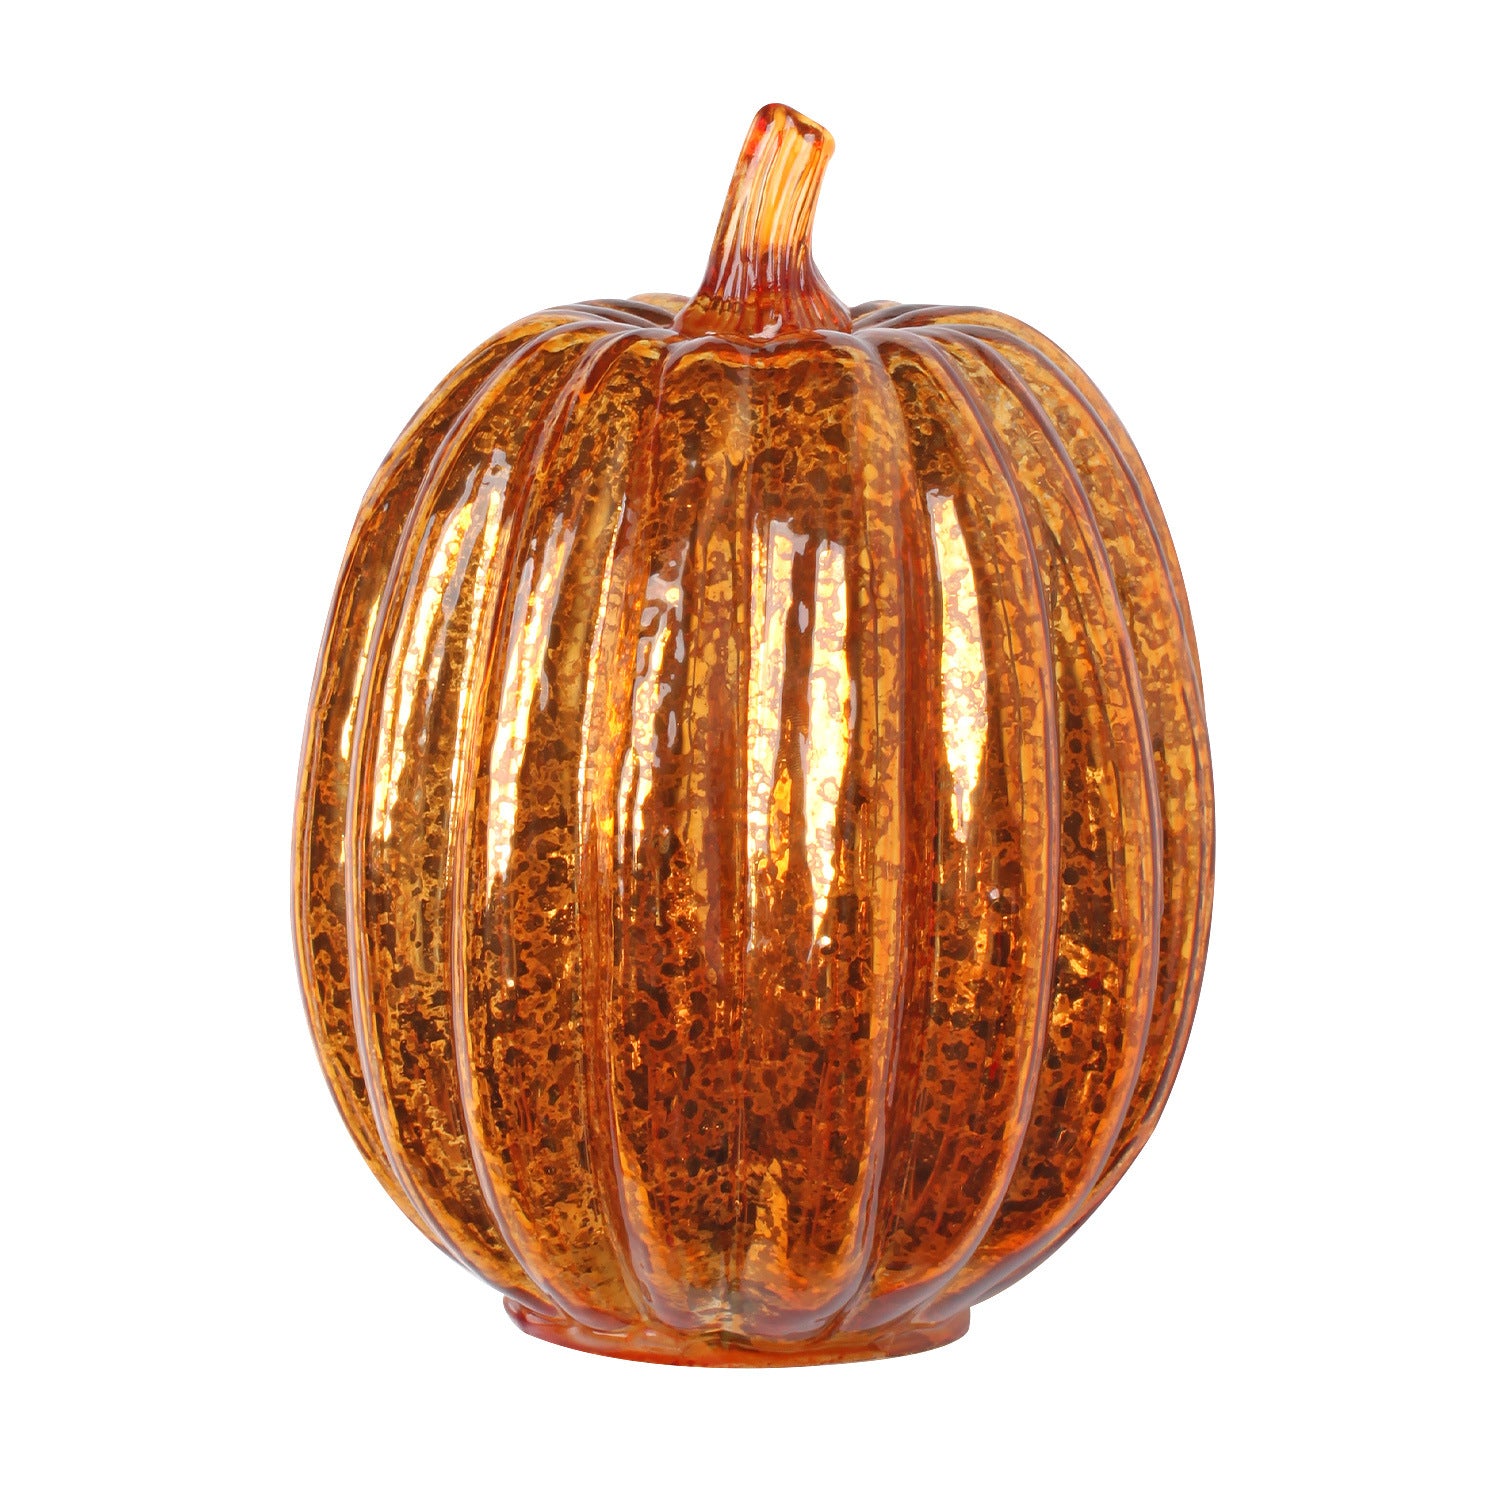 Glass Pumpkin Light LED Glowing Delicate Halloween Decorative Lamp Party Supplies For Thanksgiving Halloween Fall Decorations, Pumpkin lanterns, Jack o Lanterns, Halloween Lights, Halloween Decoration Ornaments, Halloween inflatables, carved pumpkins, Halloween wreaths, Halloween Candles.